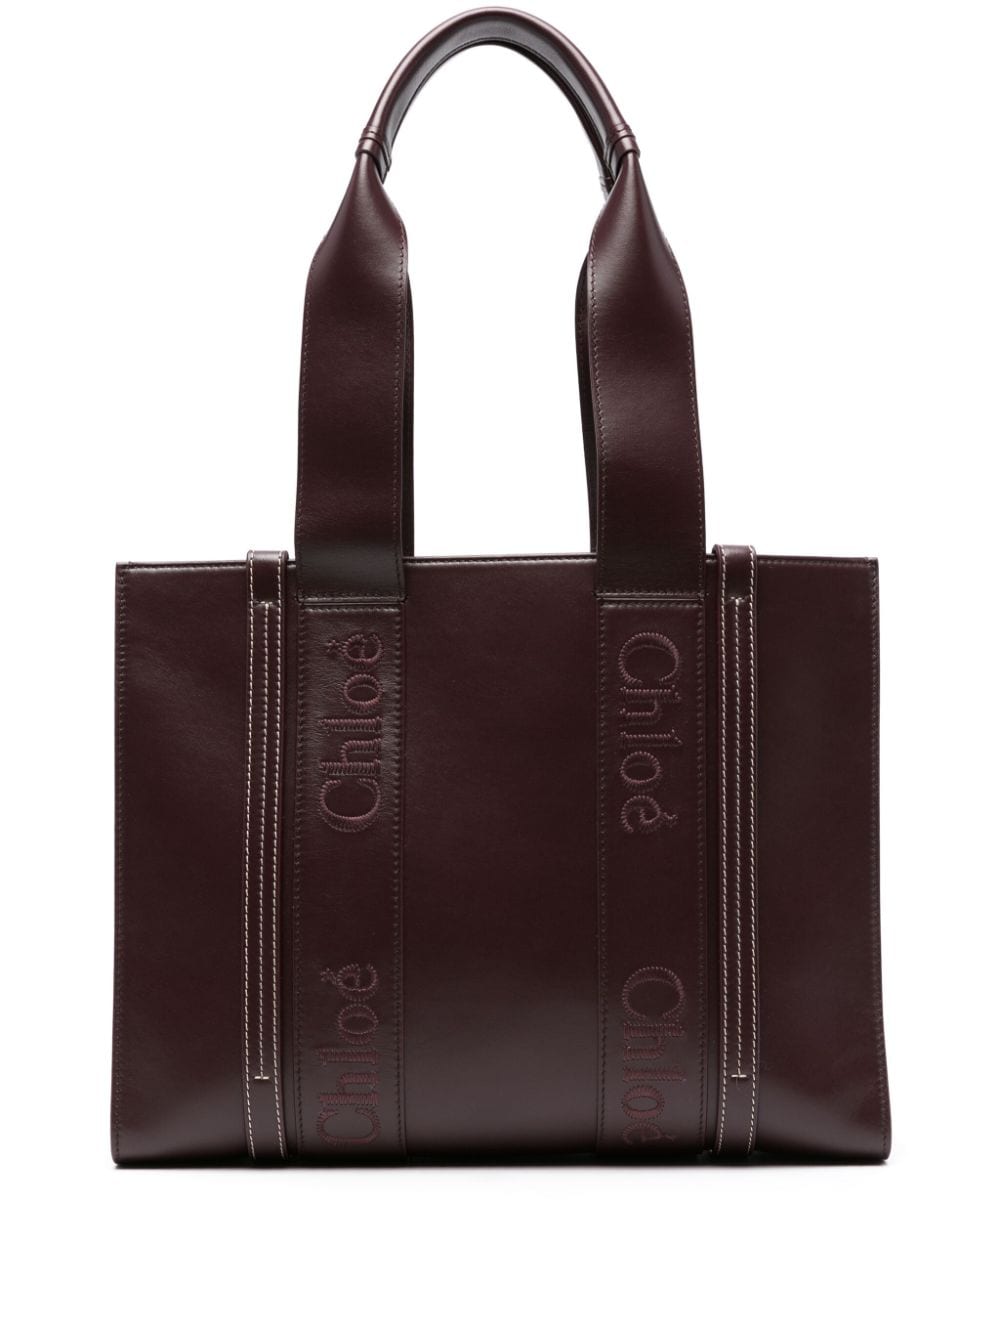 Chloé Woody leather tote bag - Red von Chloé